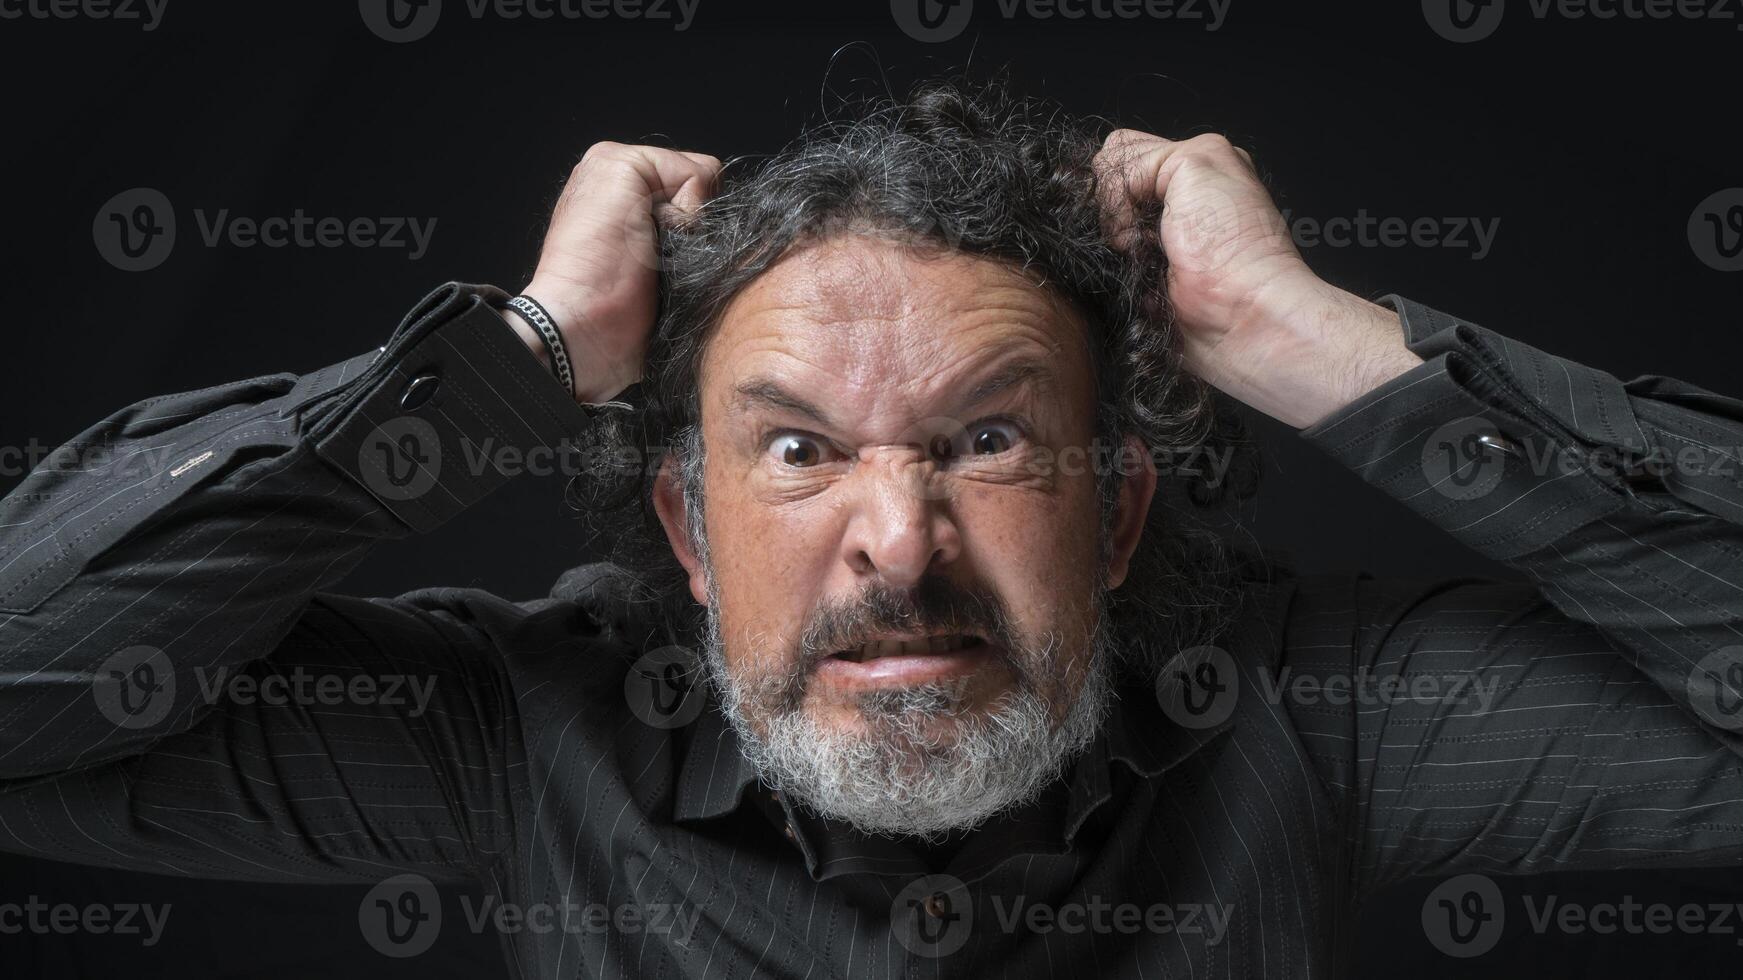 Man with white beard and black curly hair with very angry expression, grabbing his hair with hands, wearing black shirt against black background photo